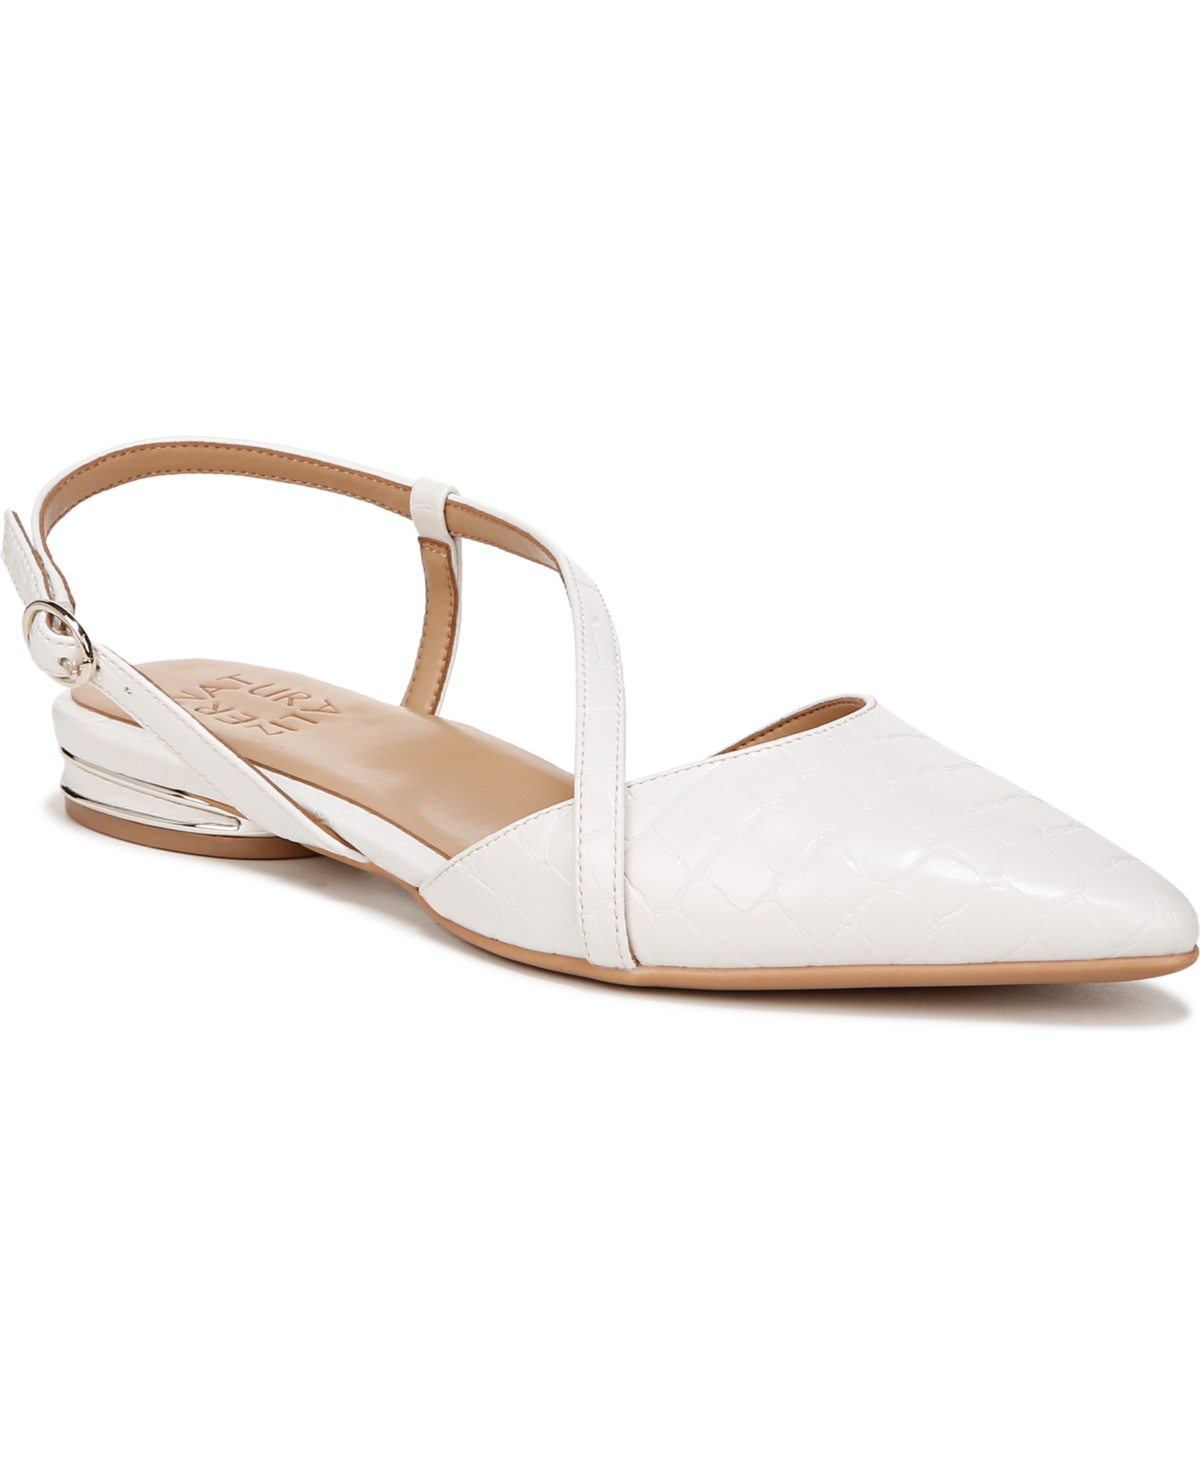 Shop Naturalizer Hawaii Slingback Flats In Warm White Croco Embossed Faux Leather